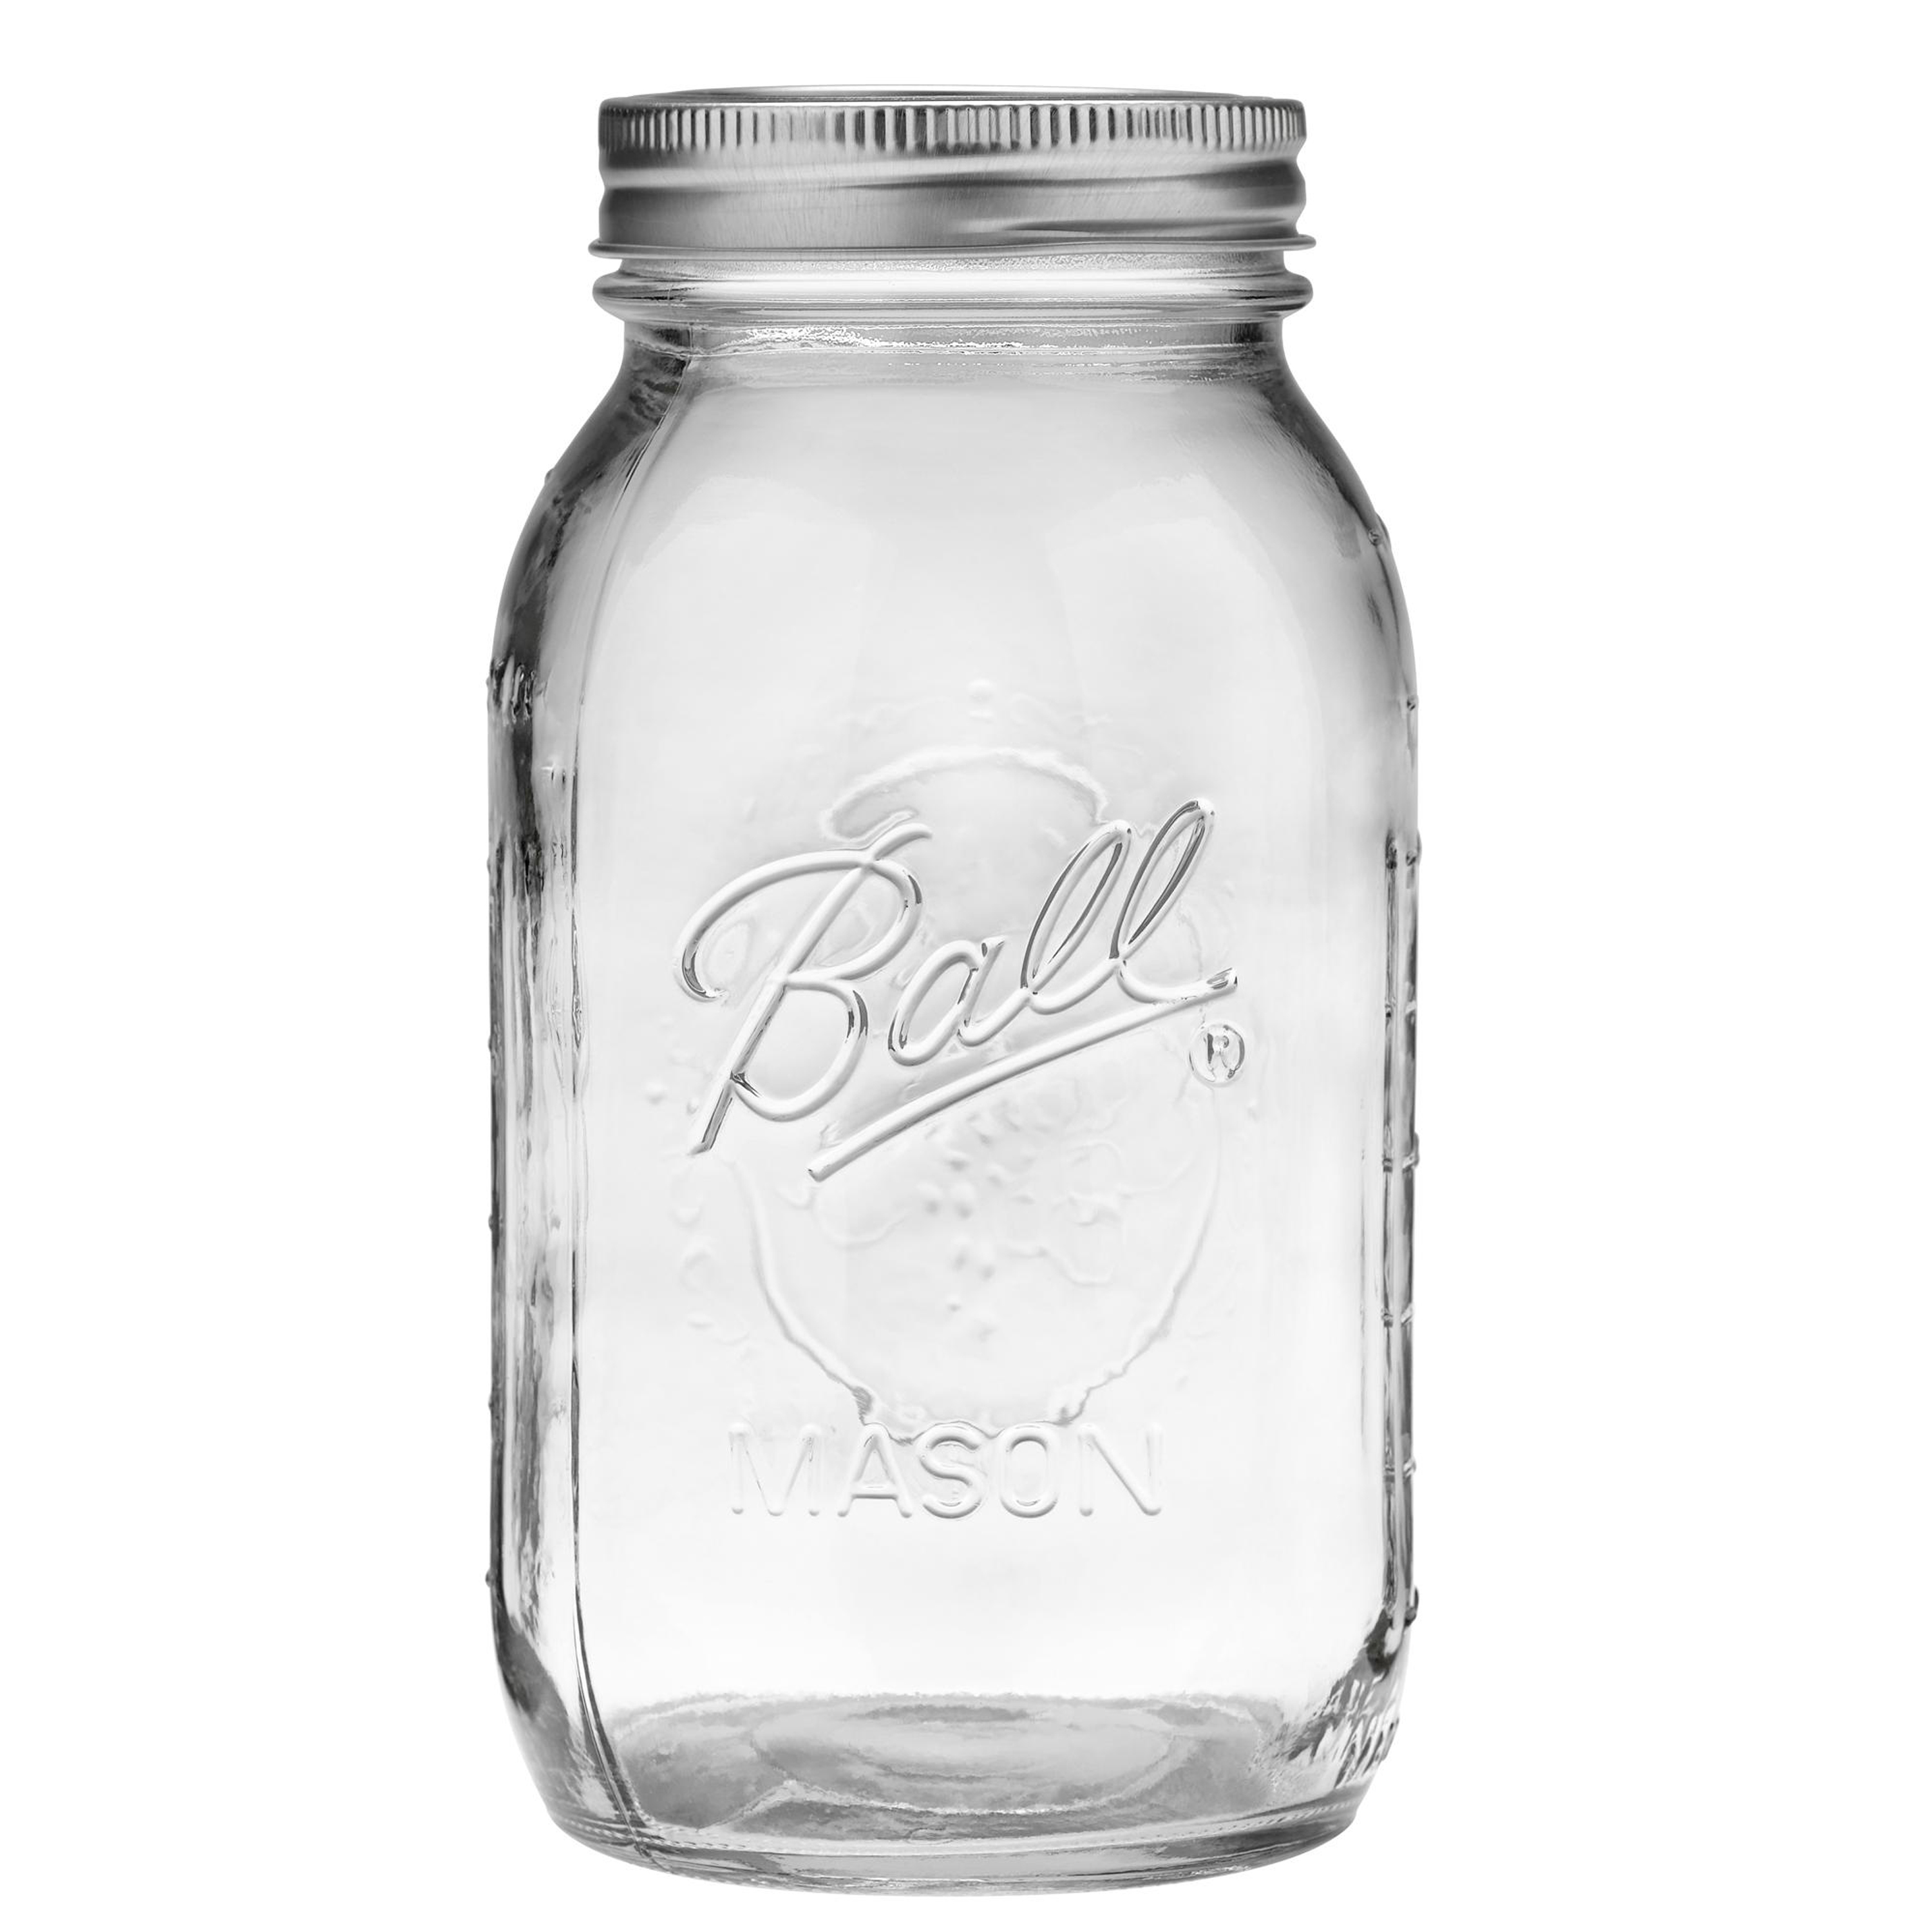 Ball Mason Regular Mouth Quart Jars with Lids and Bands, Set of 12 - image 1 of 9